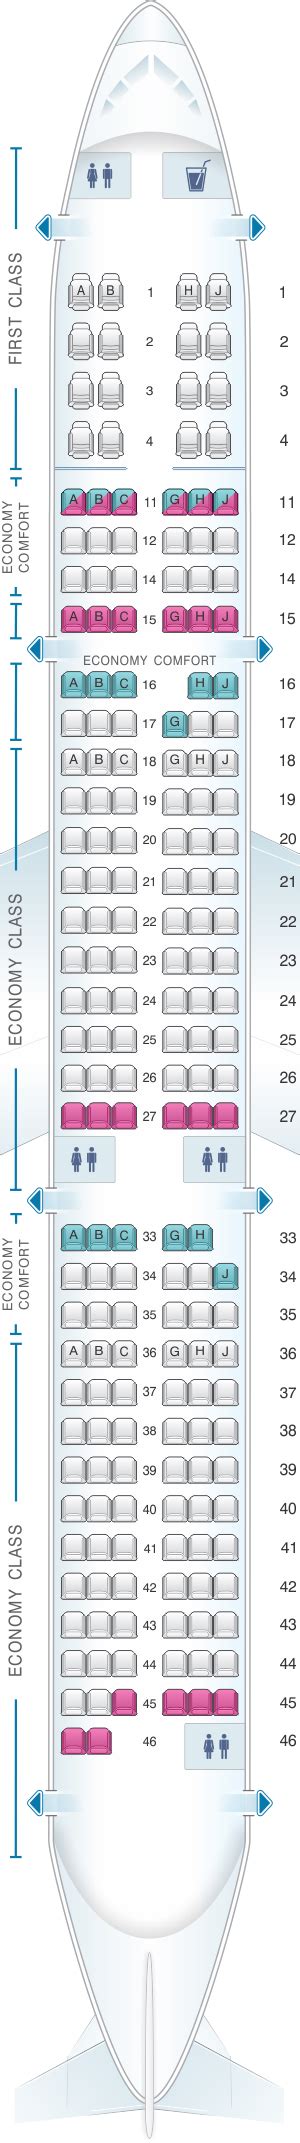 Oct 8, 2018 · Hawaiian Airlines' first-class cabin on the A321neo consisted of 16 recliner seats in a 2-2 configuration. This was a single-aisle plane, compared to the Boeing 767 and its two aisles. This could certainly slow down boarding, but an upside to this was a smaller, more exclusive premium cabin (the 767 had 18 seats). . 